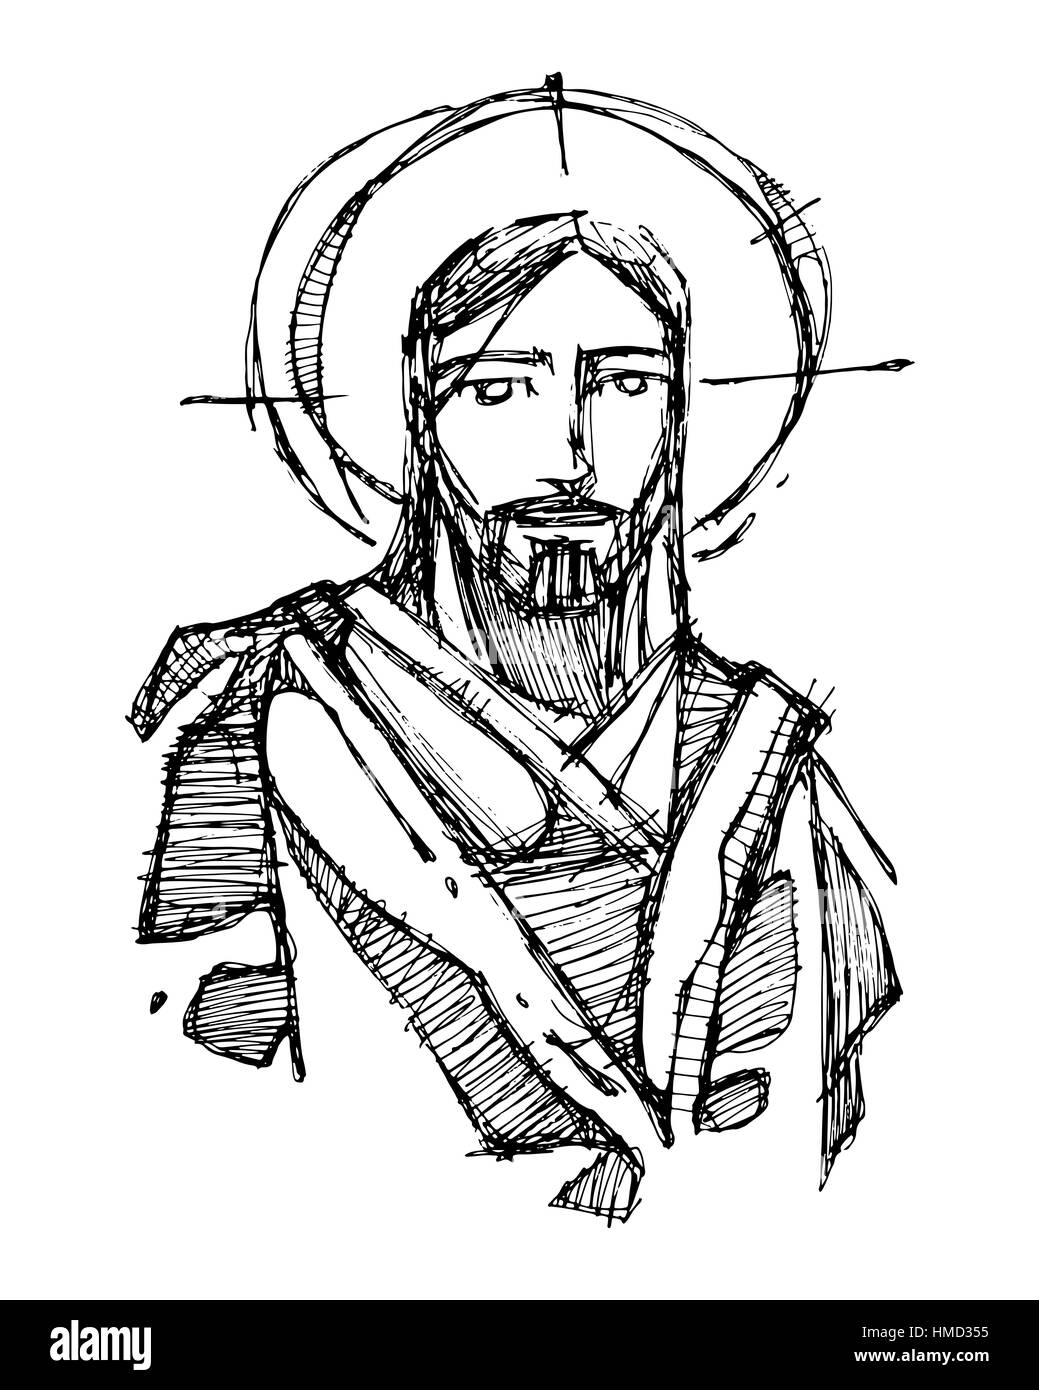 Hand drawn vector illustration or drawing of Jesus Christ smiling Stock Photo